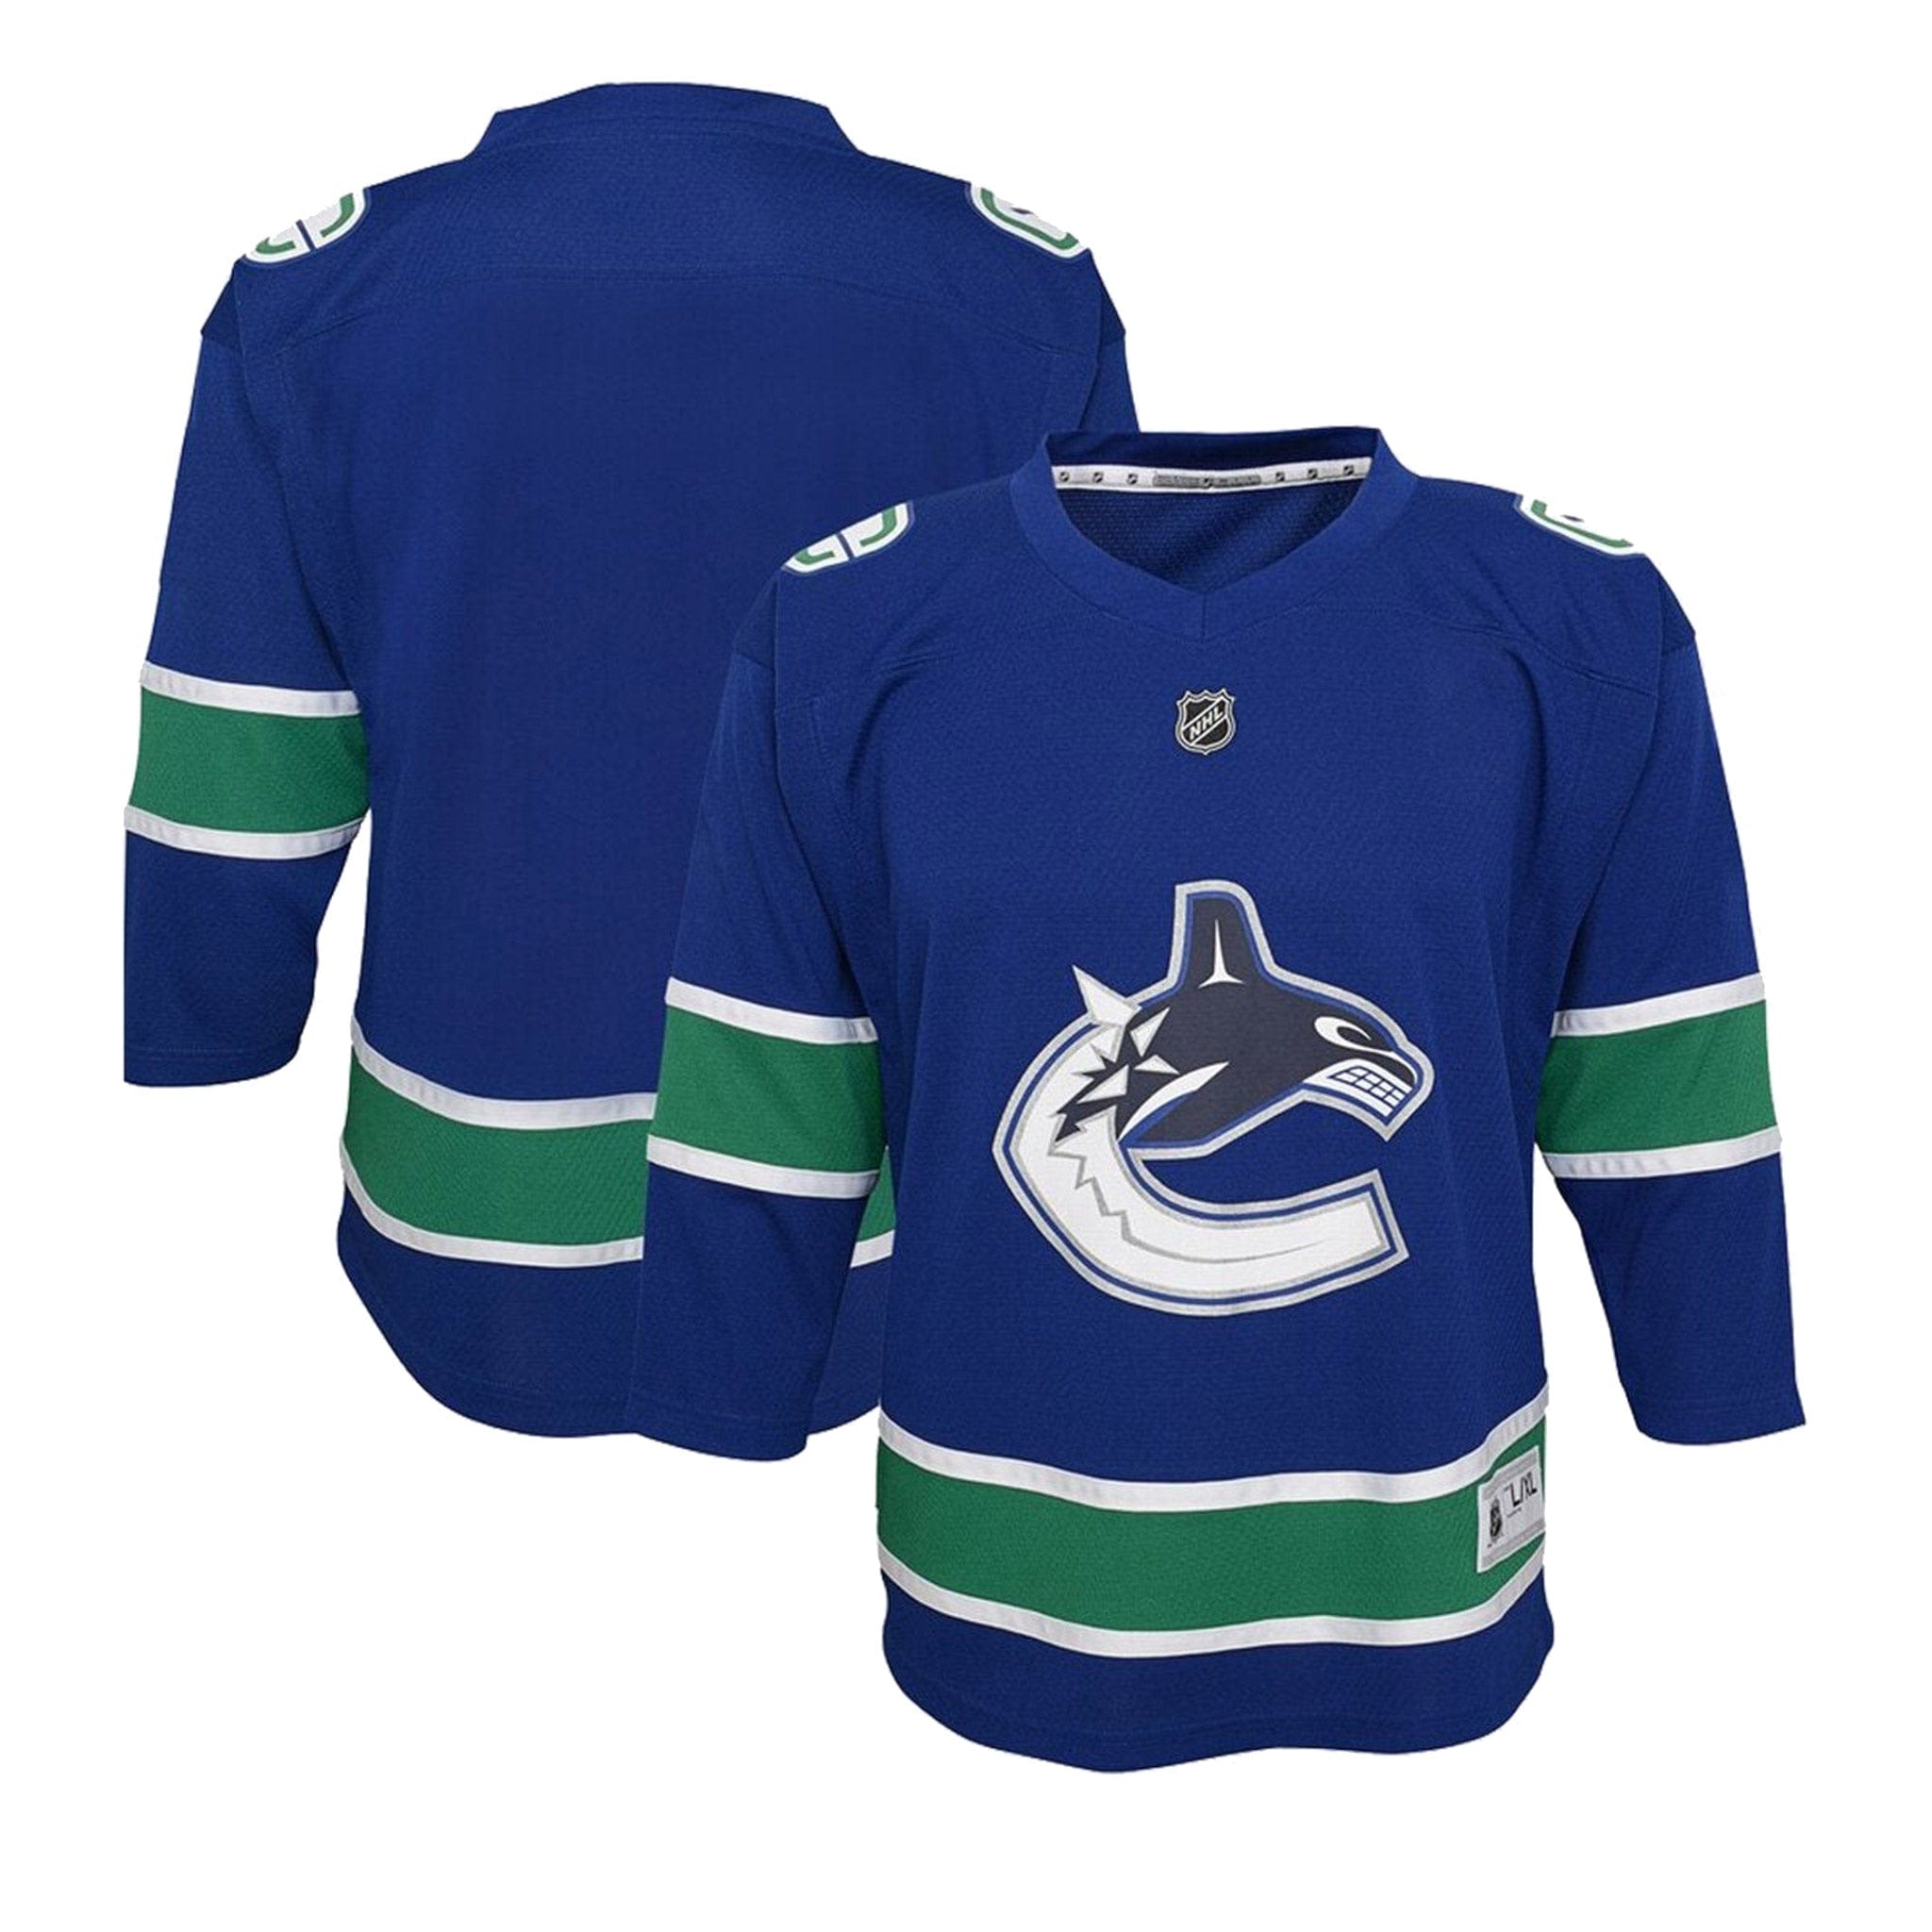  Outerstuff Toddler NHL Replica Jersey-Home Calgary